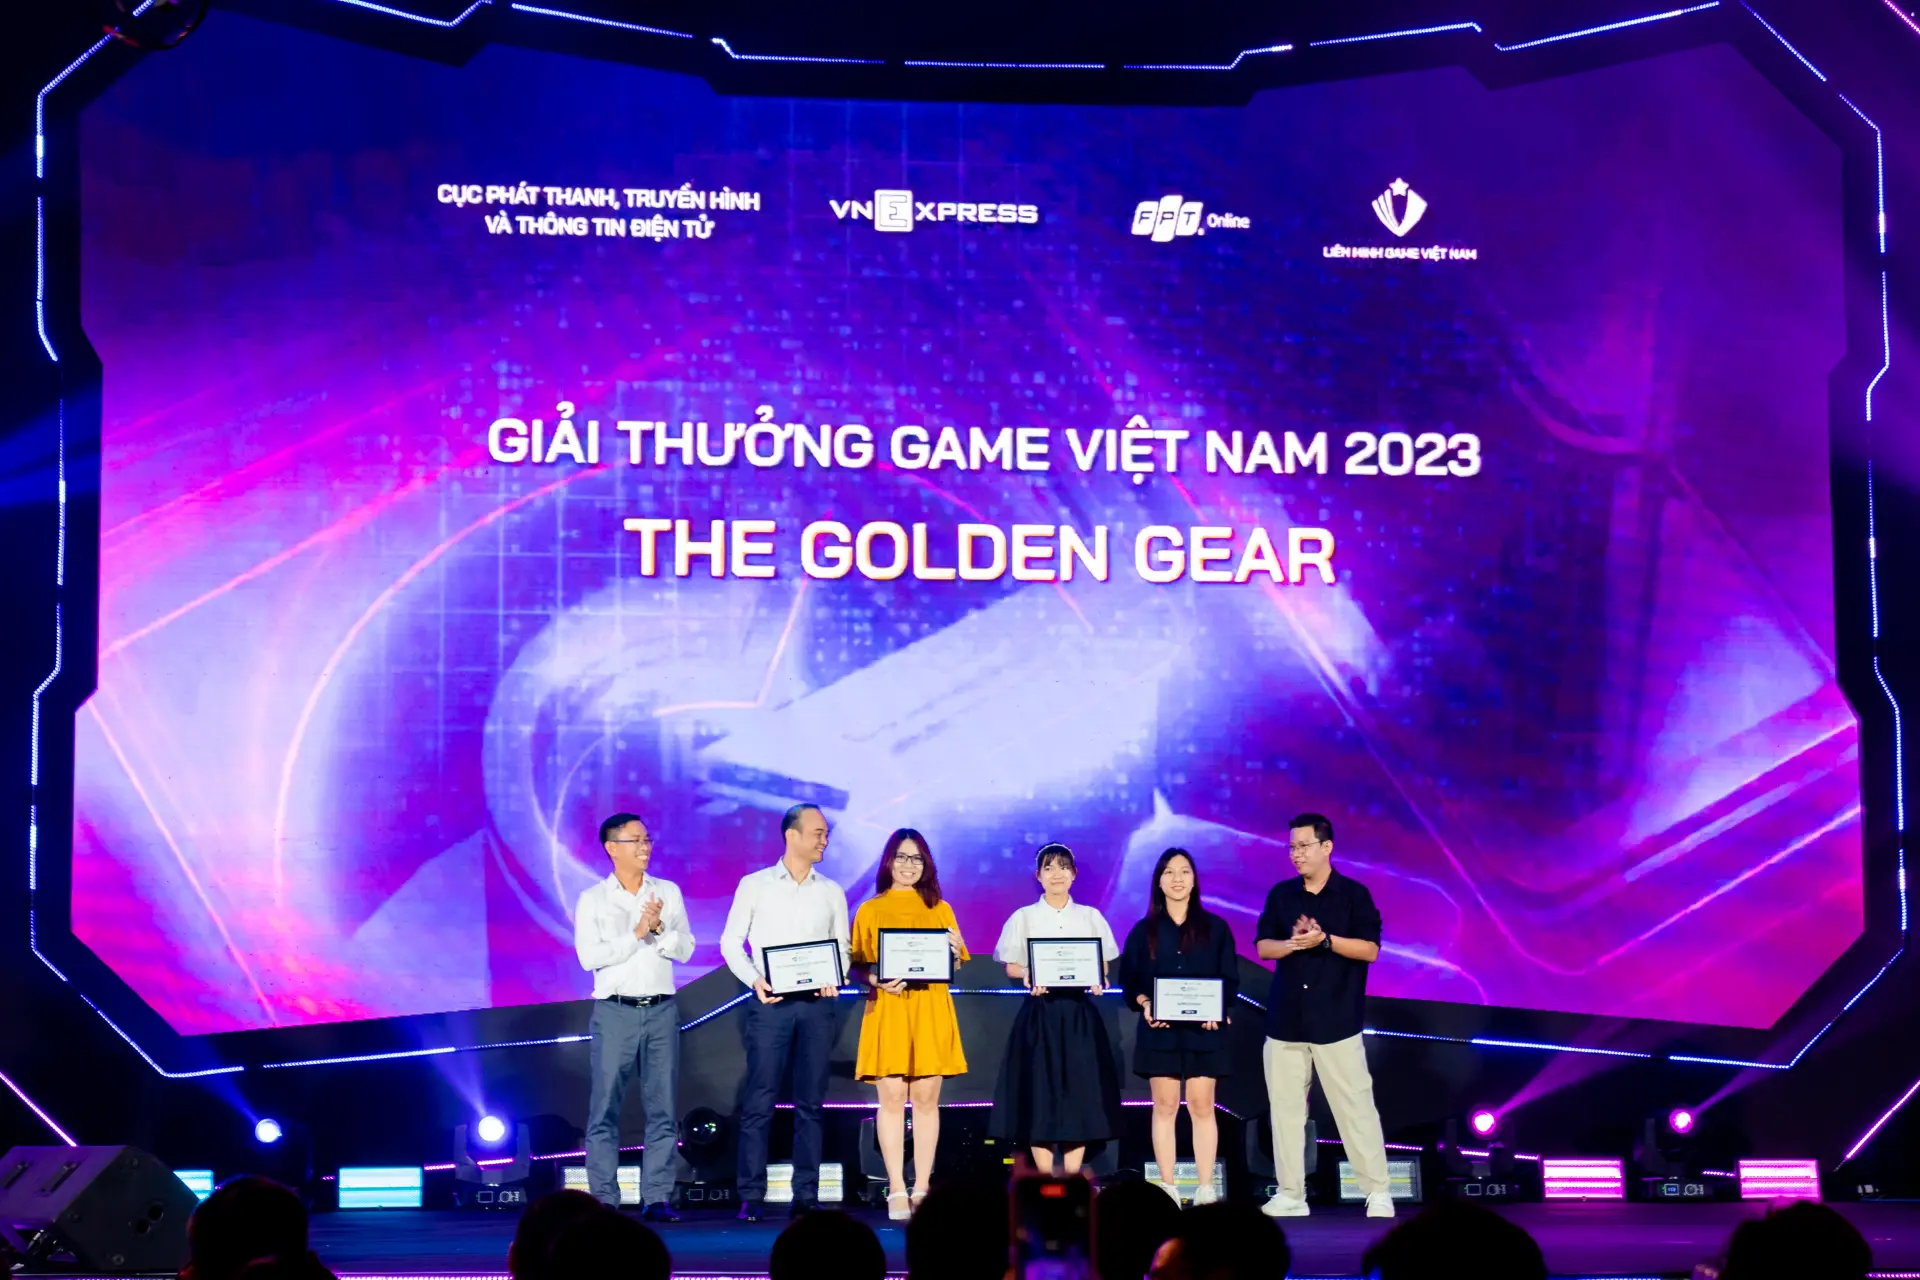 9pay-is-honored-to-be-in-top-5-favorite-payment-channels-at-vietnam-game-awards-2023